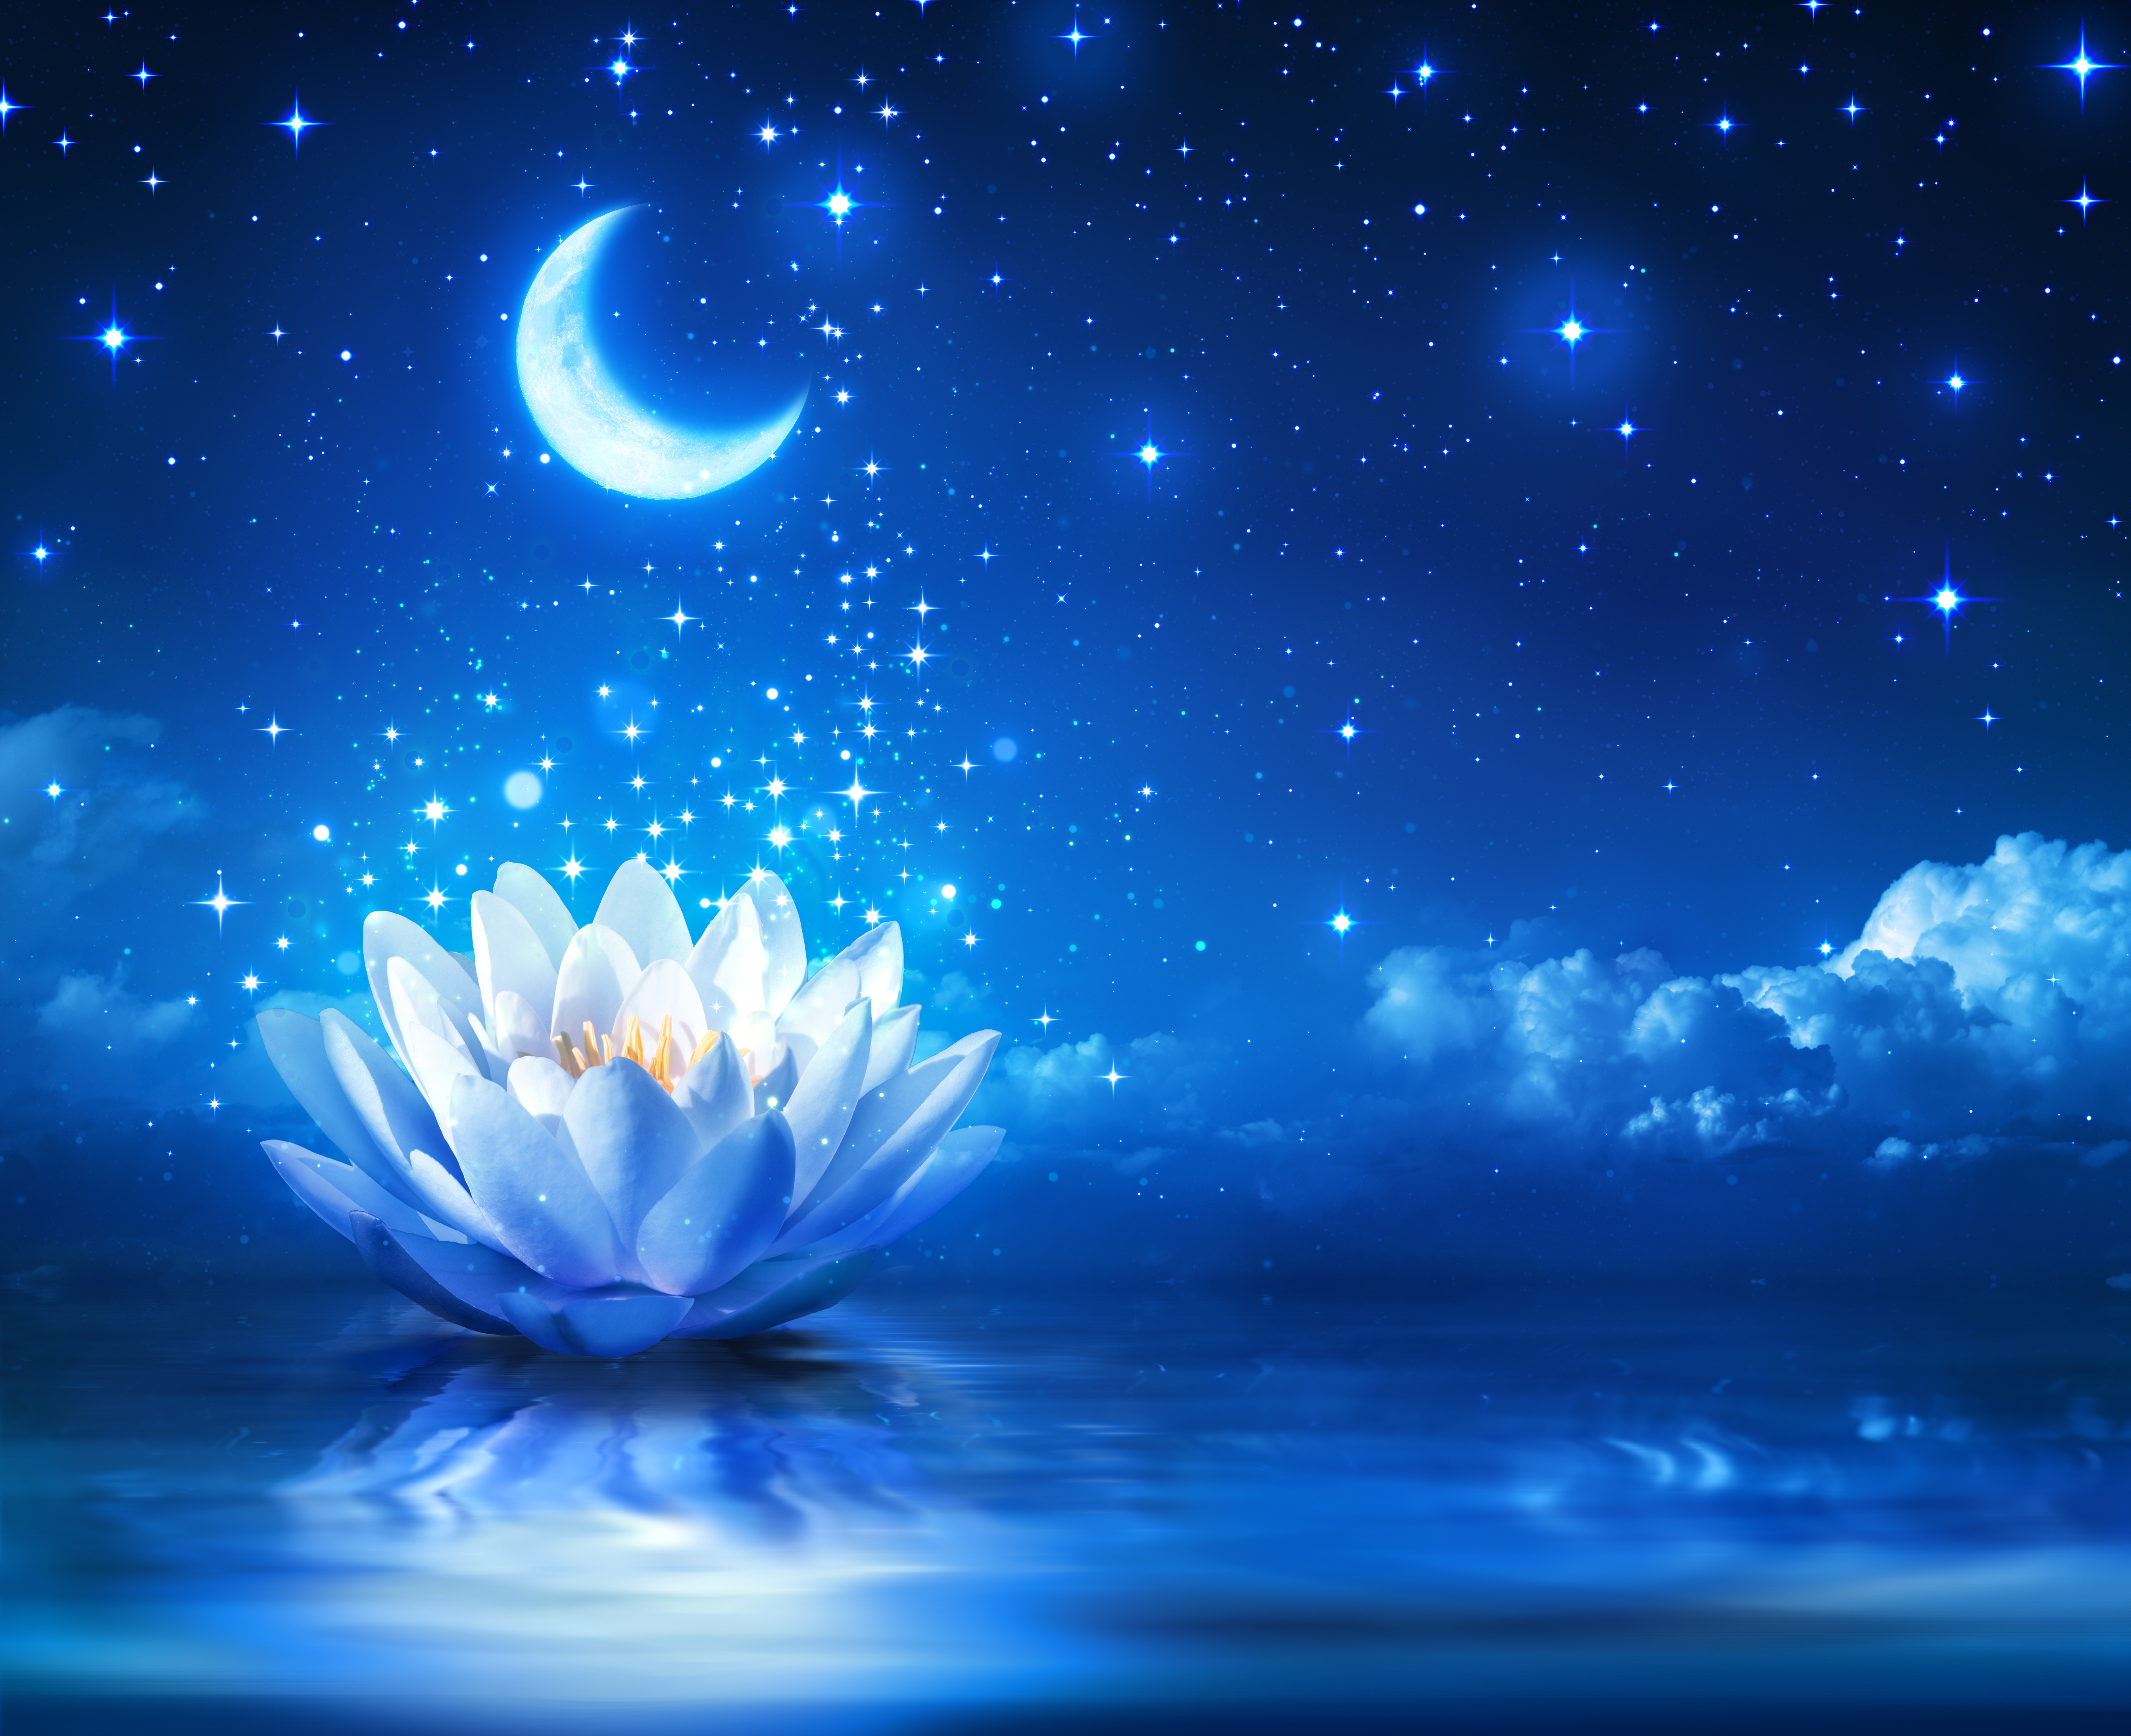 flower, artistic, moon, night, reflection, sparkles, stars, water lily, white flower, flowers